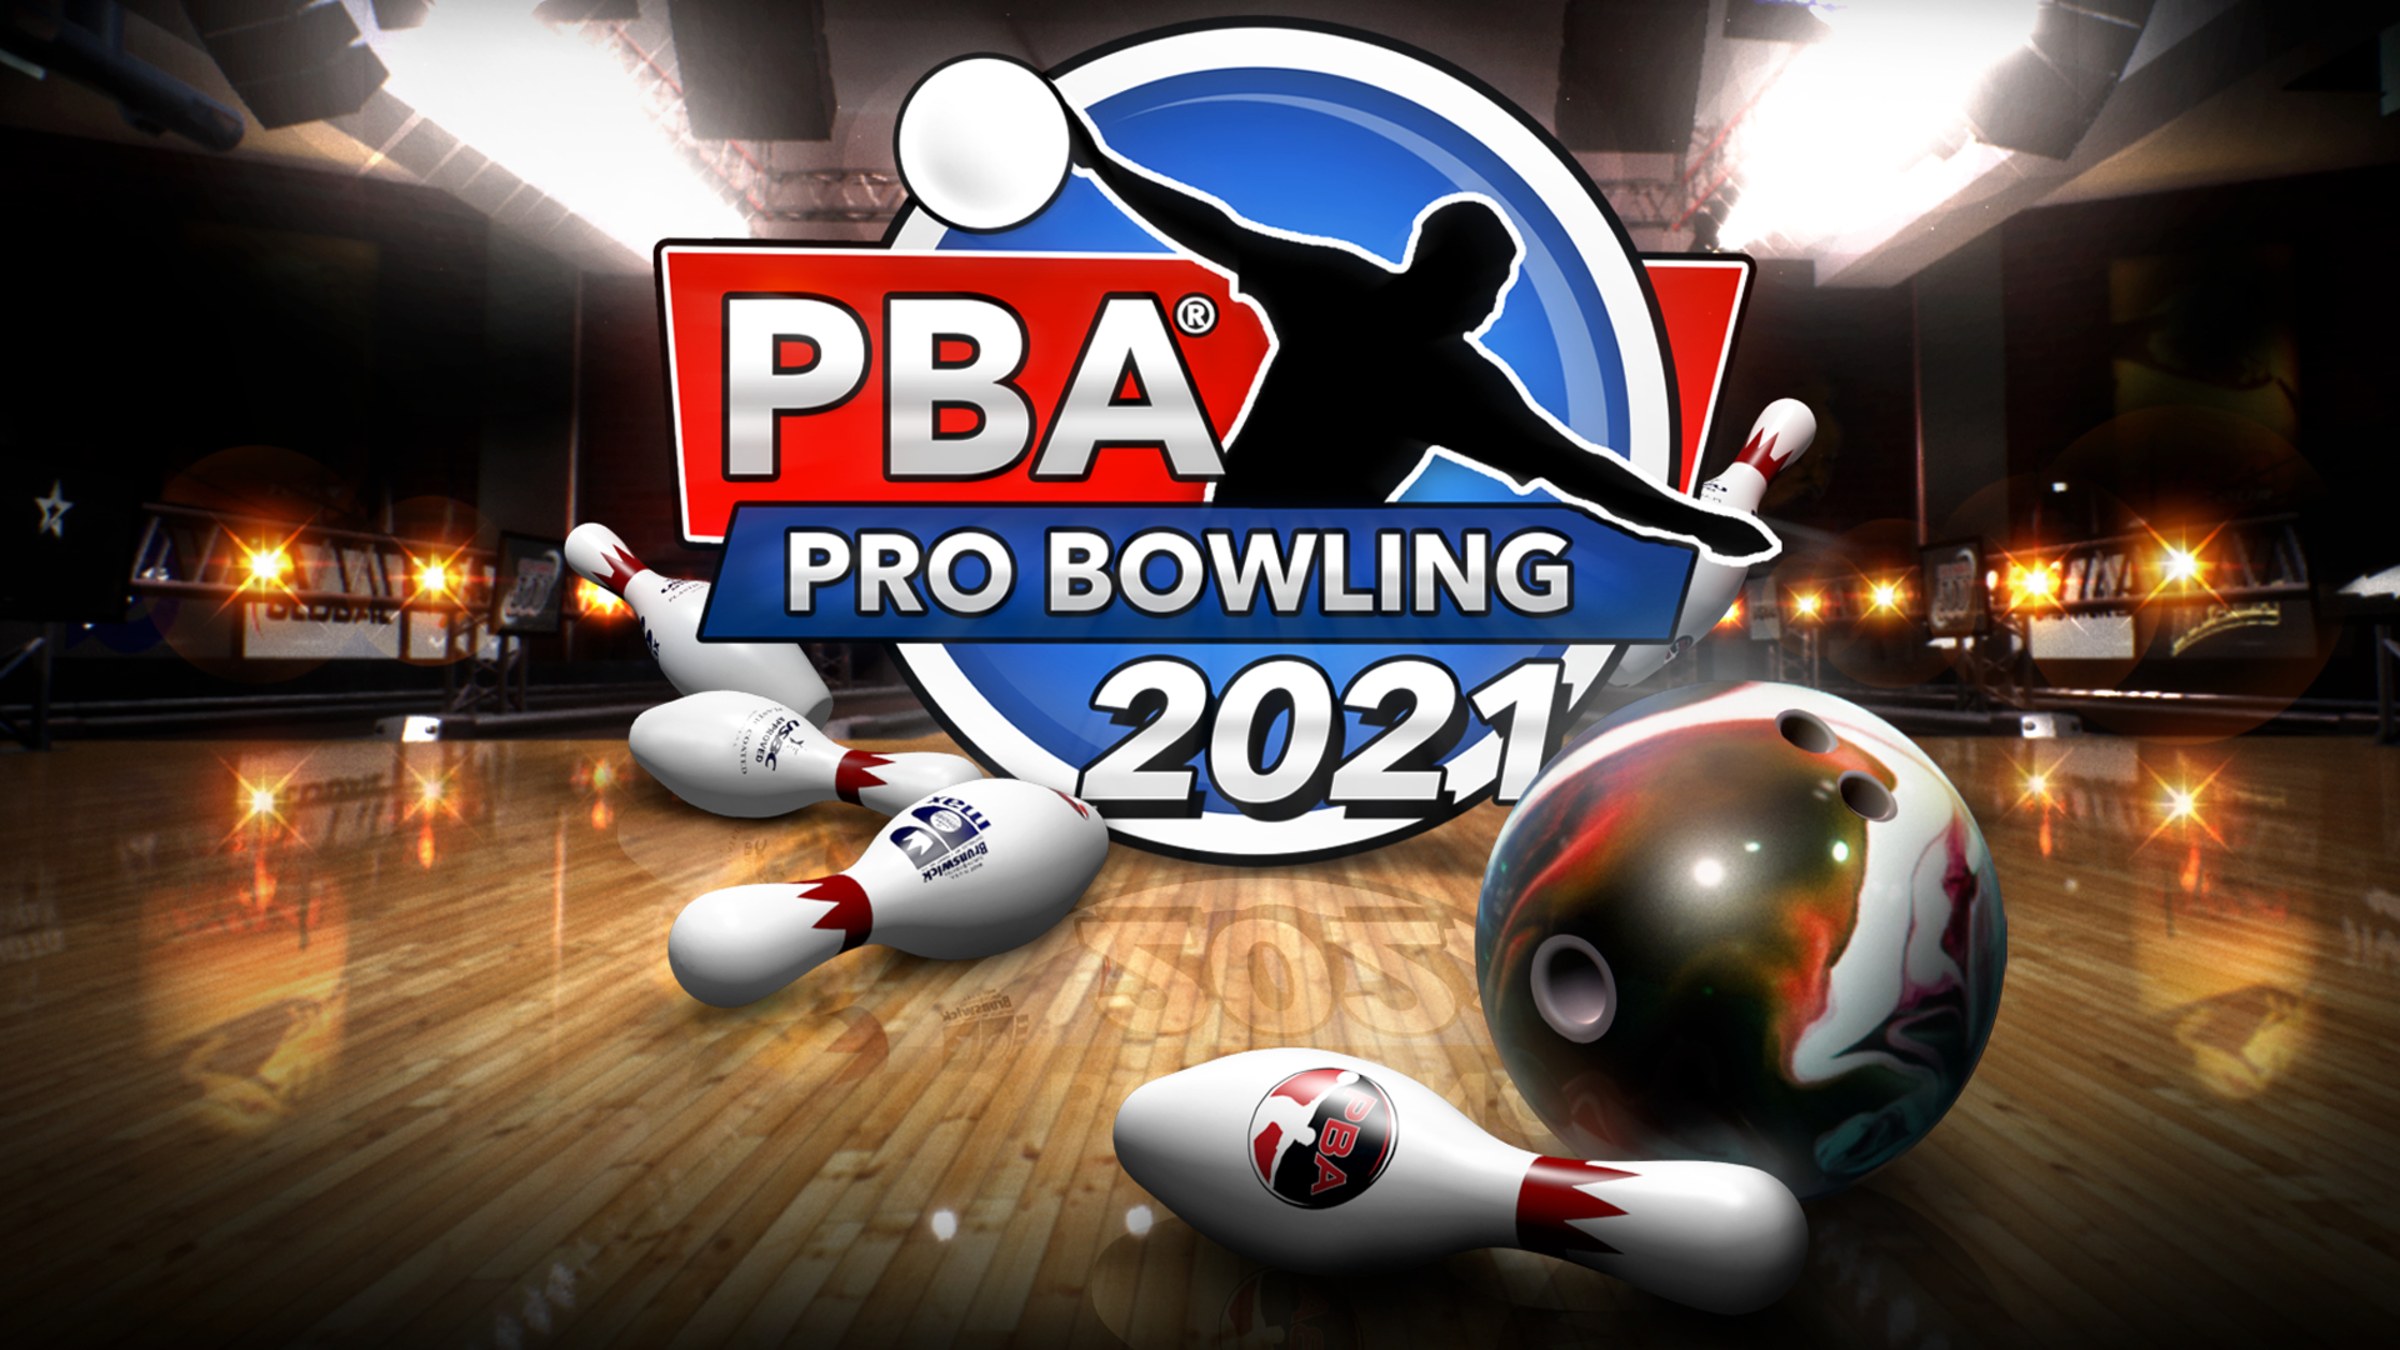 PBA Pro Bowling 2021 for Switch - Official Site